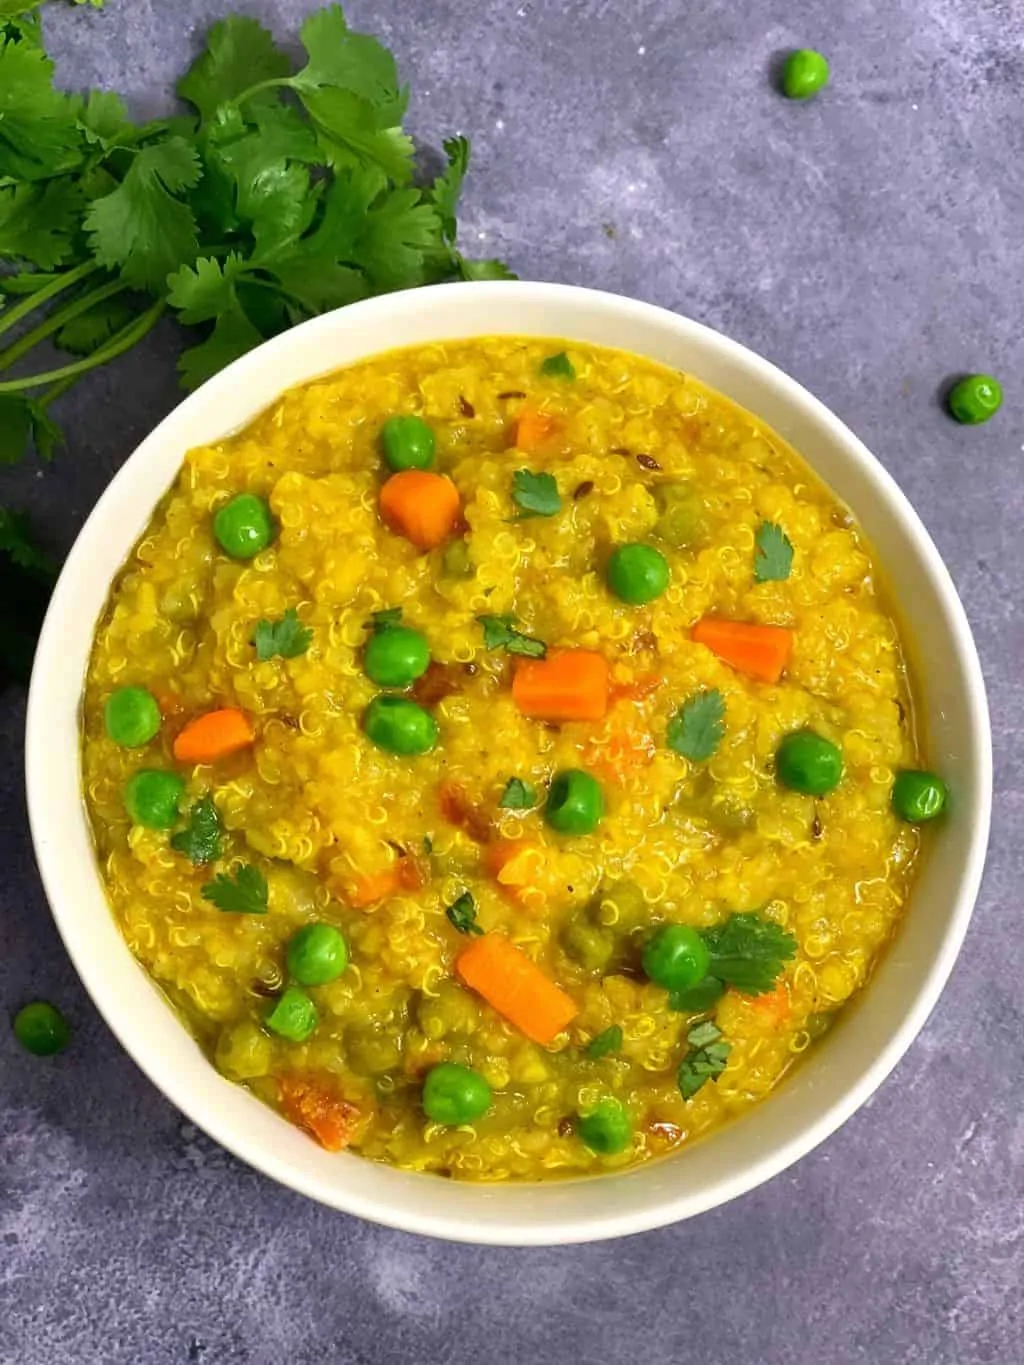 quinoa khichdi served in a bowl with cilantro and green peas on the side